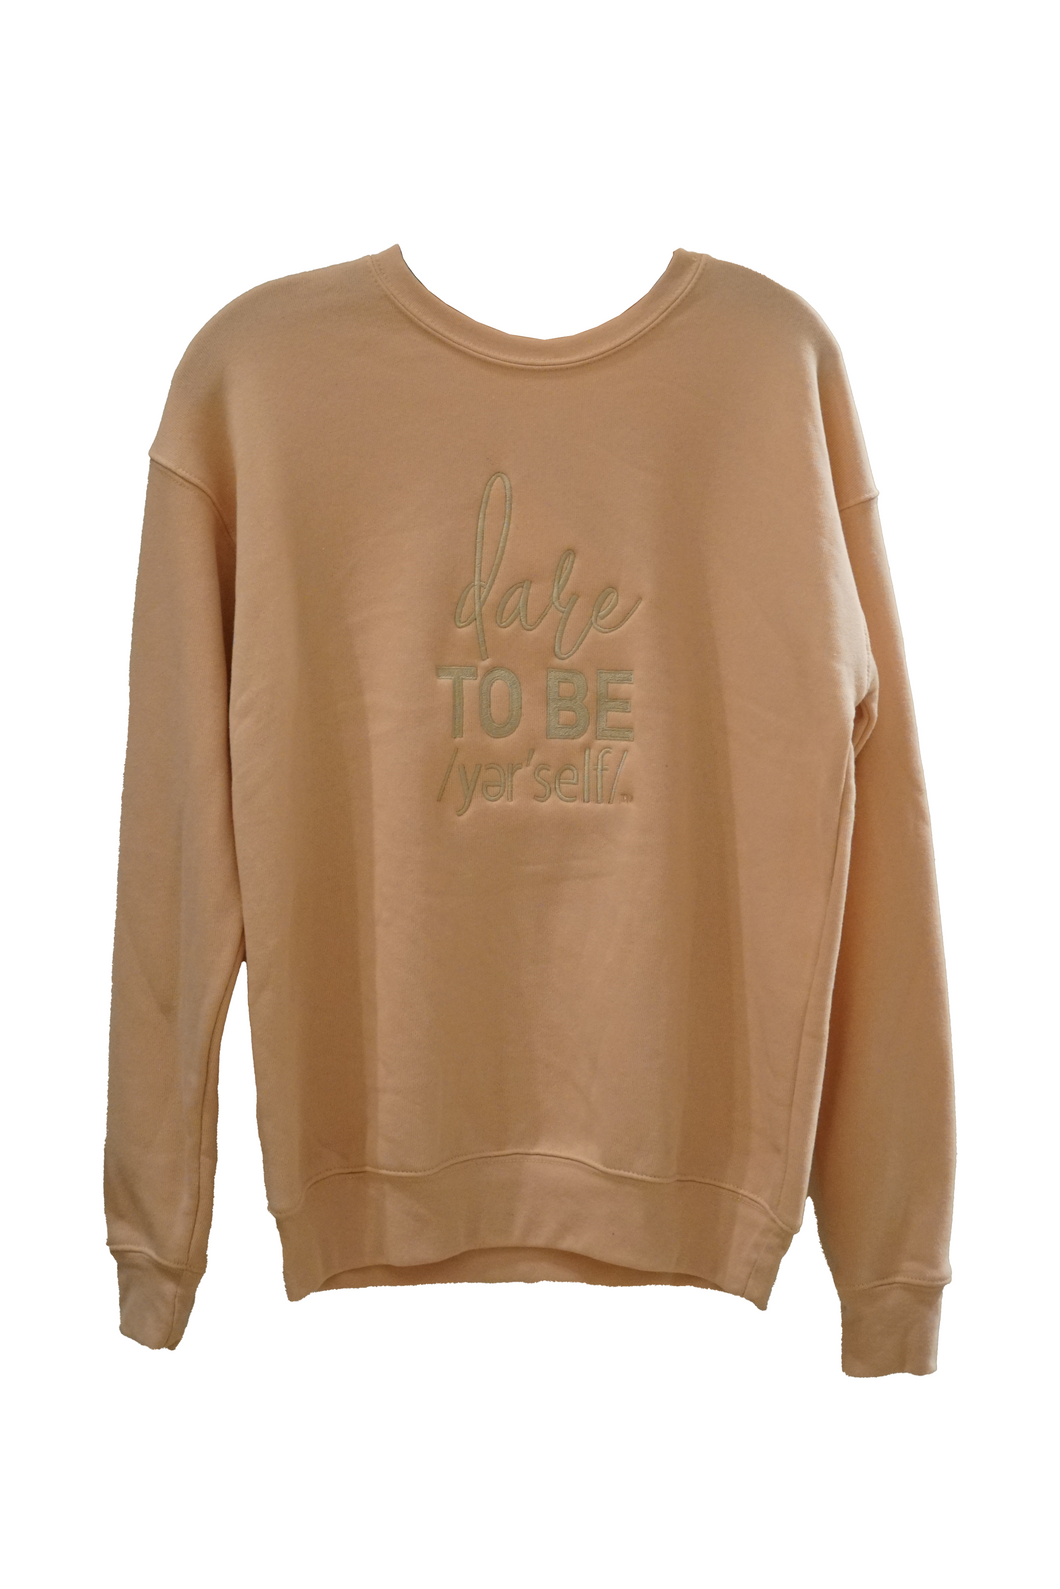 TAN CREWNECK WITH LIGHT EMBROIDERED DTB YER'SELF